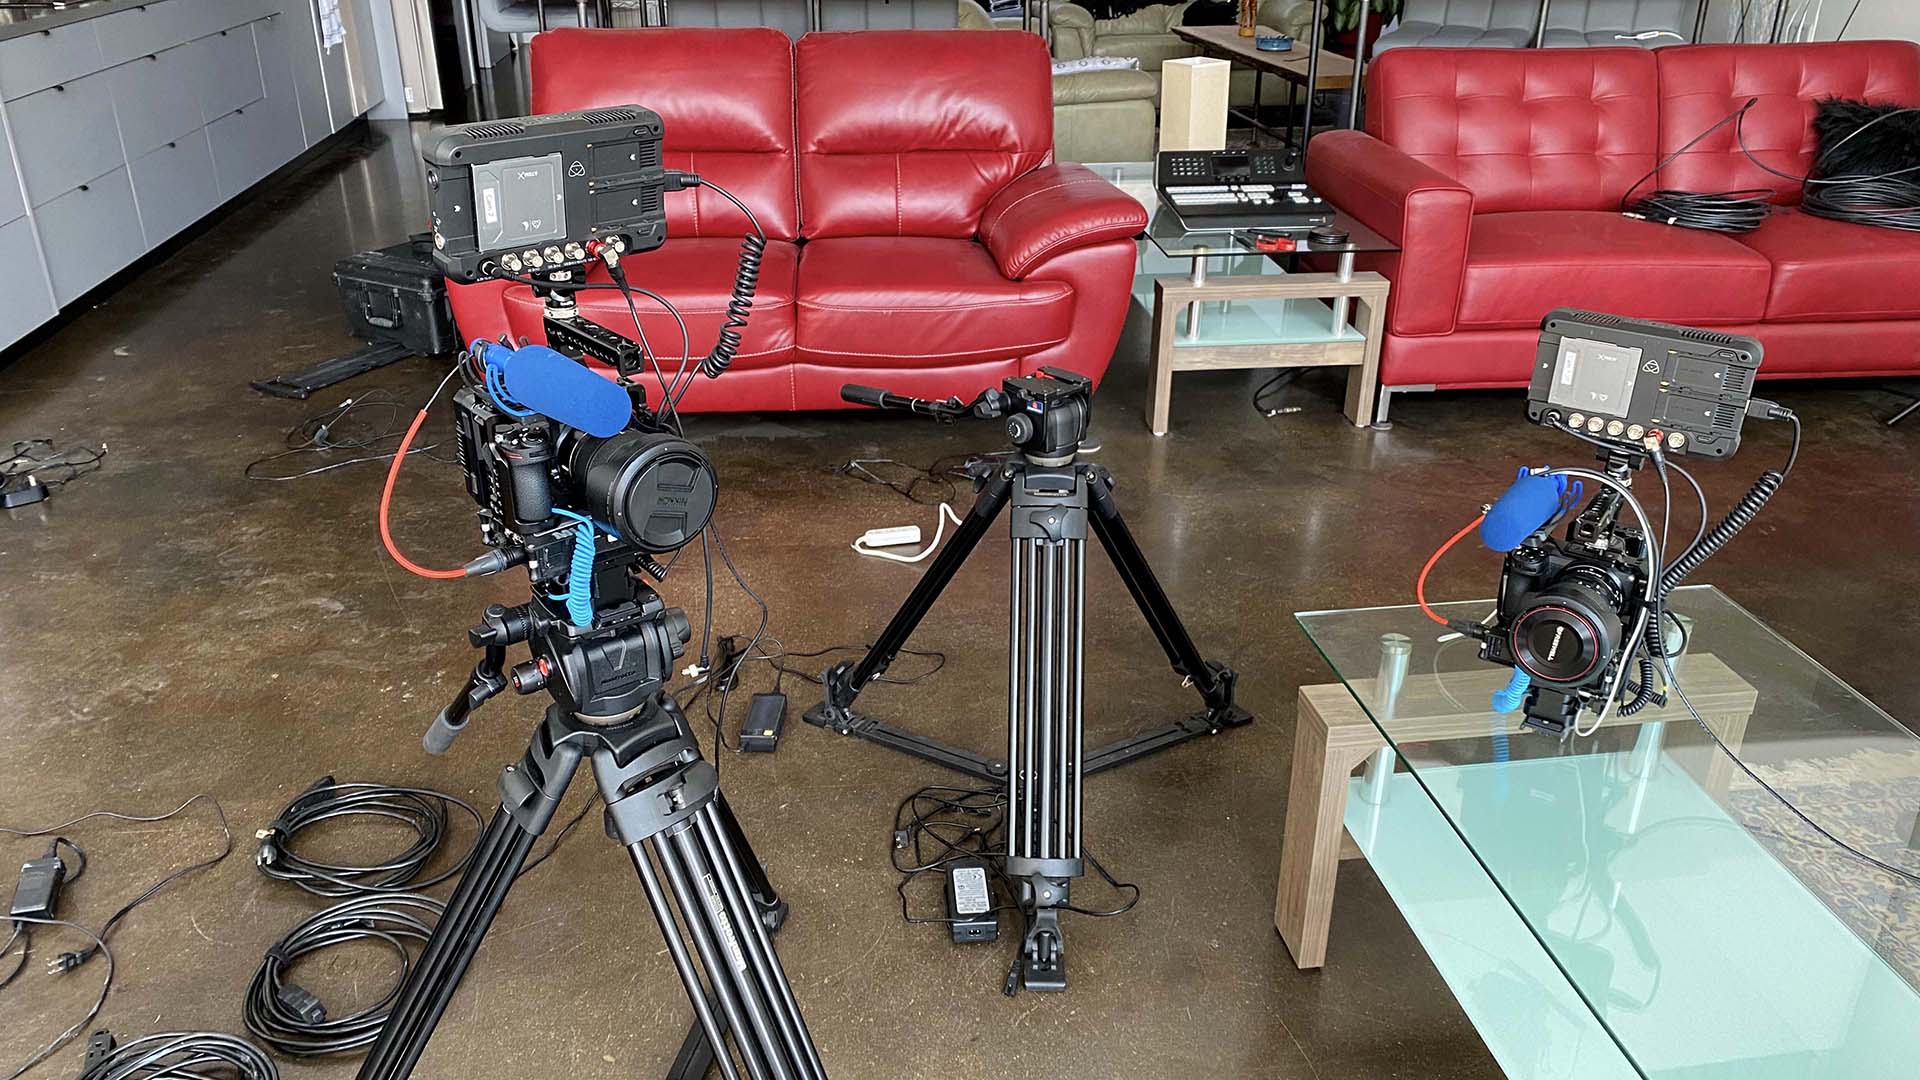 Pure 4k DSLR Mirrorless Camera Rigs On Tripods